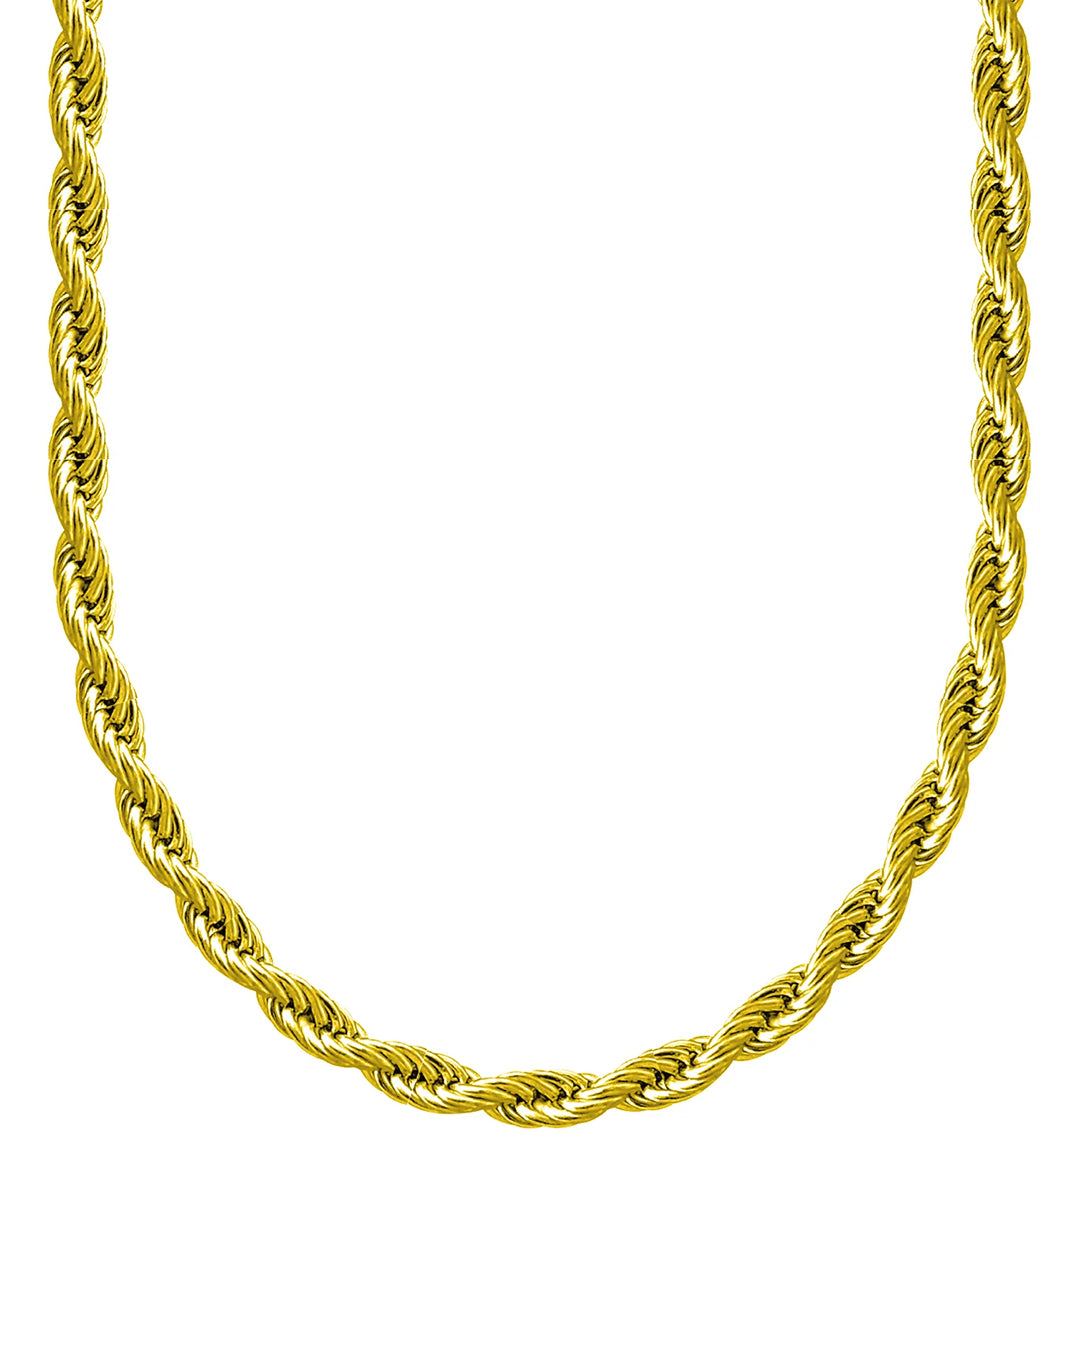 Rope Chain 5mm (Gold)